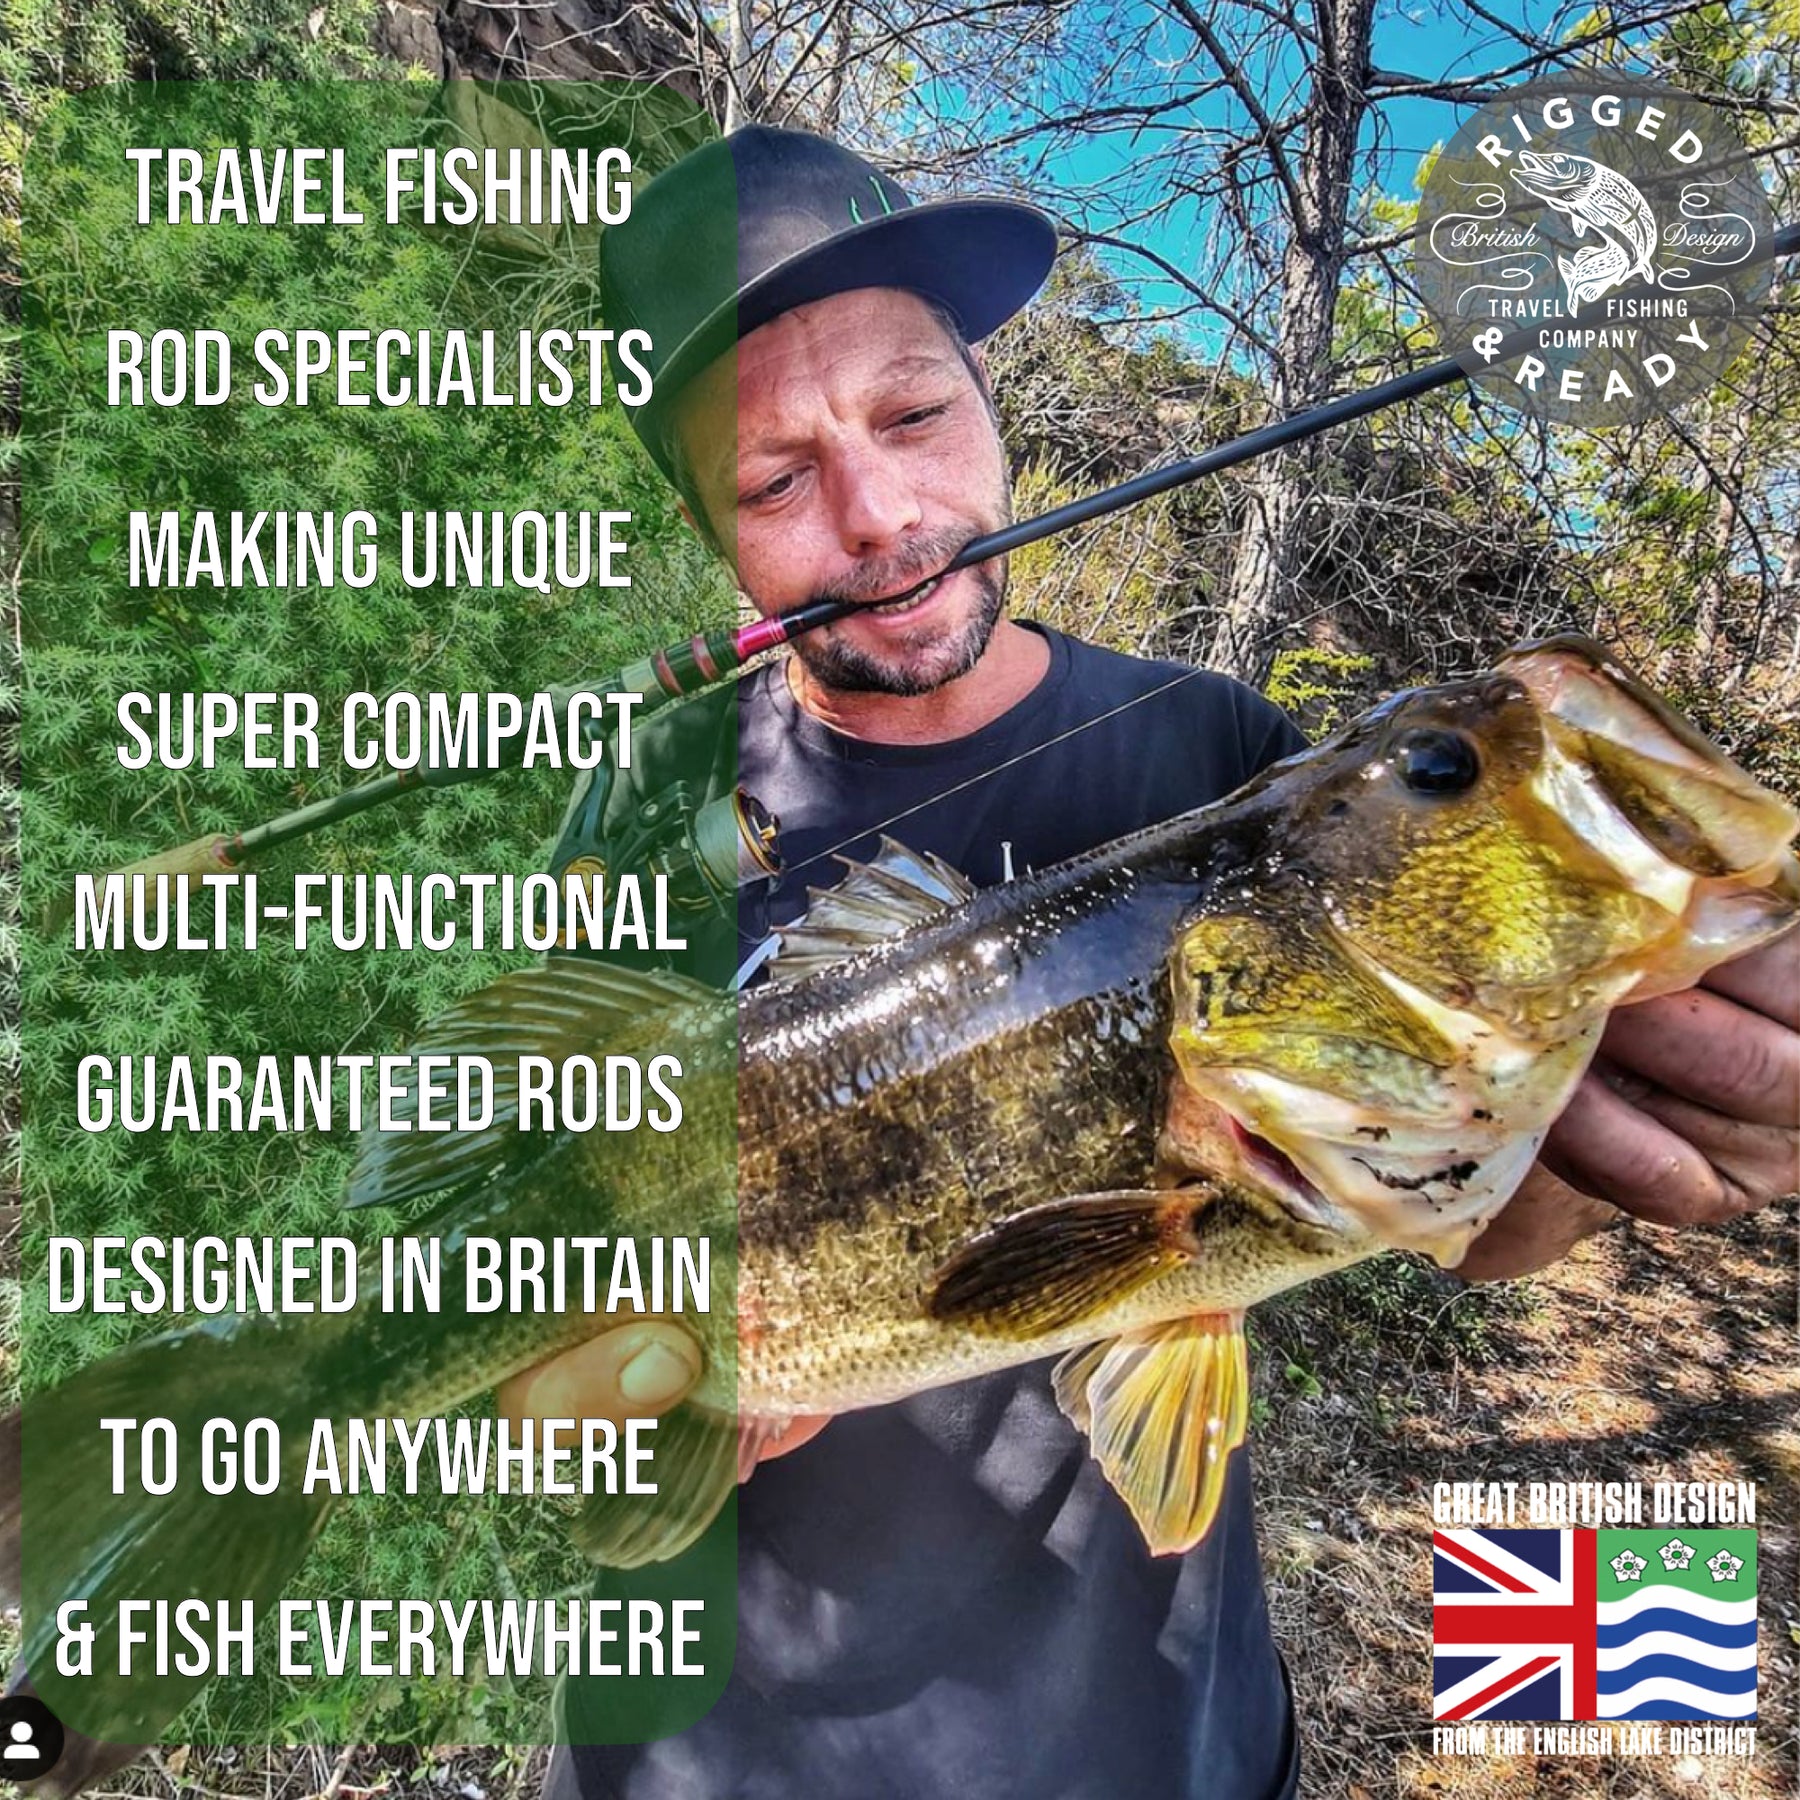 Travel Fishing Accessories & Parts, Travel Fishing Specialists